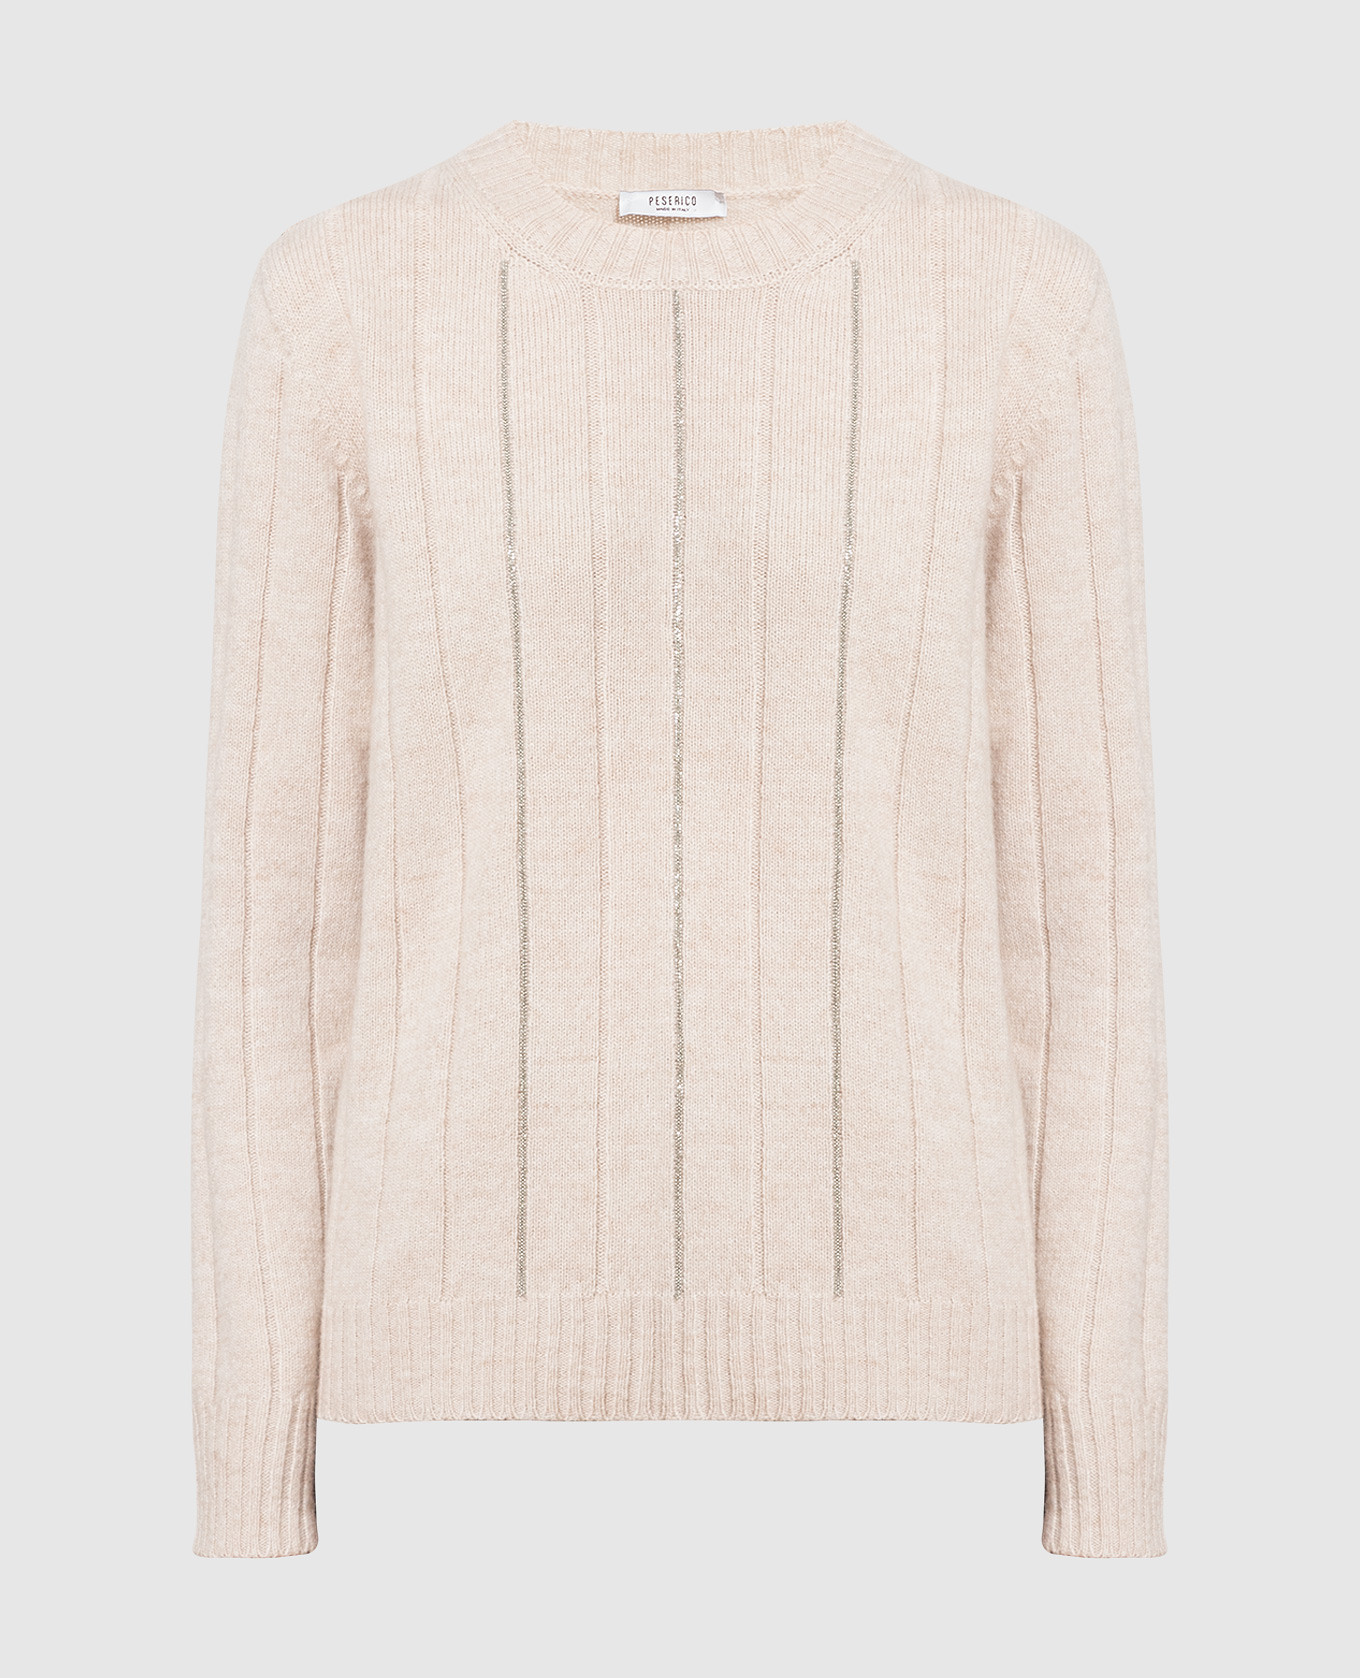 Beige wool, silk and cashmere jumper with monil chain